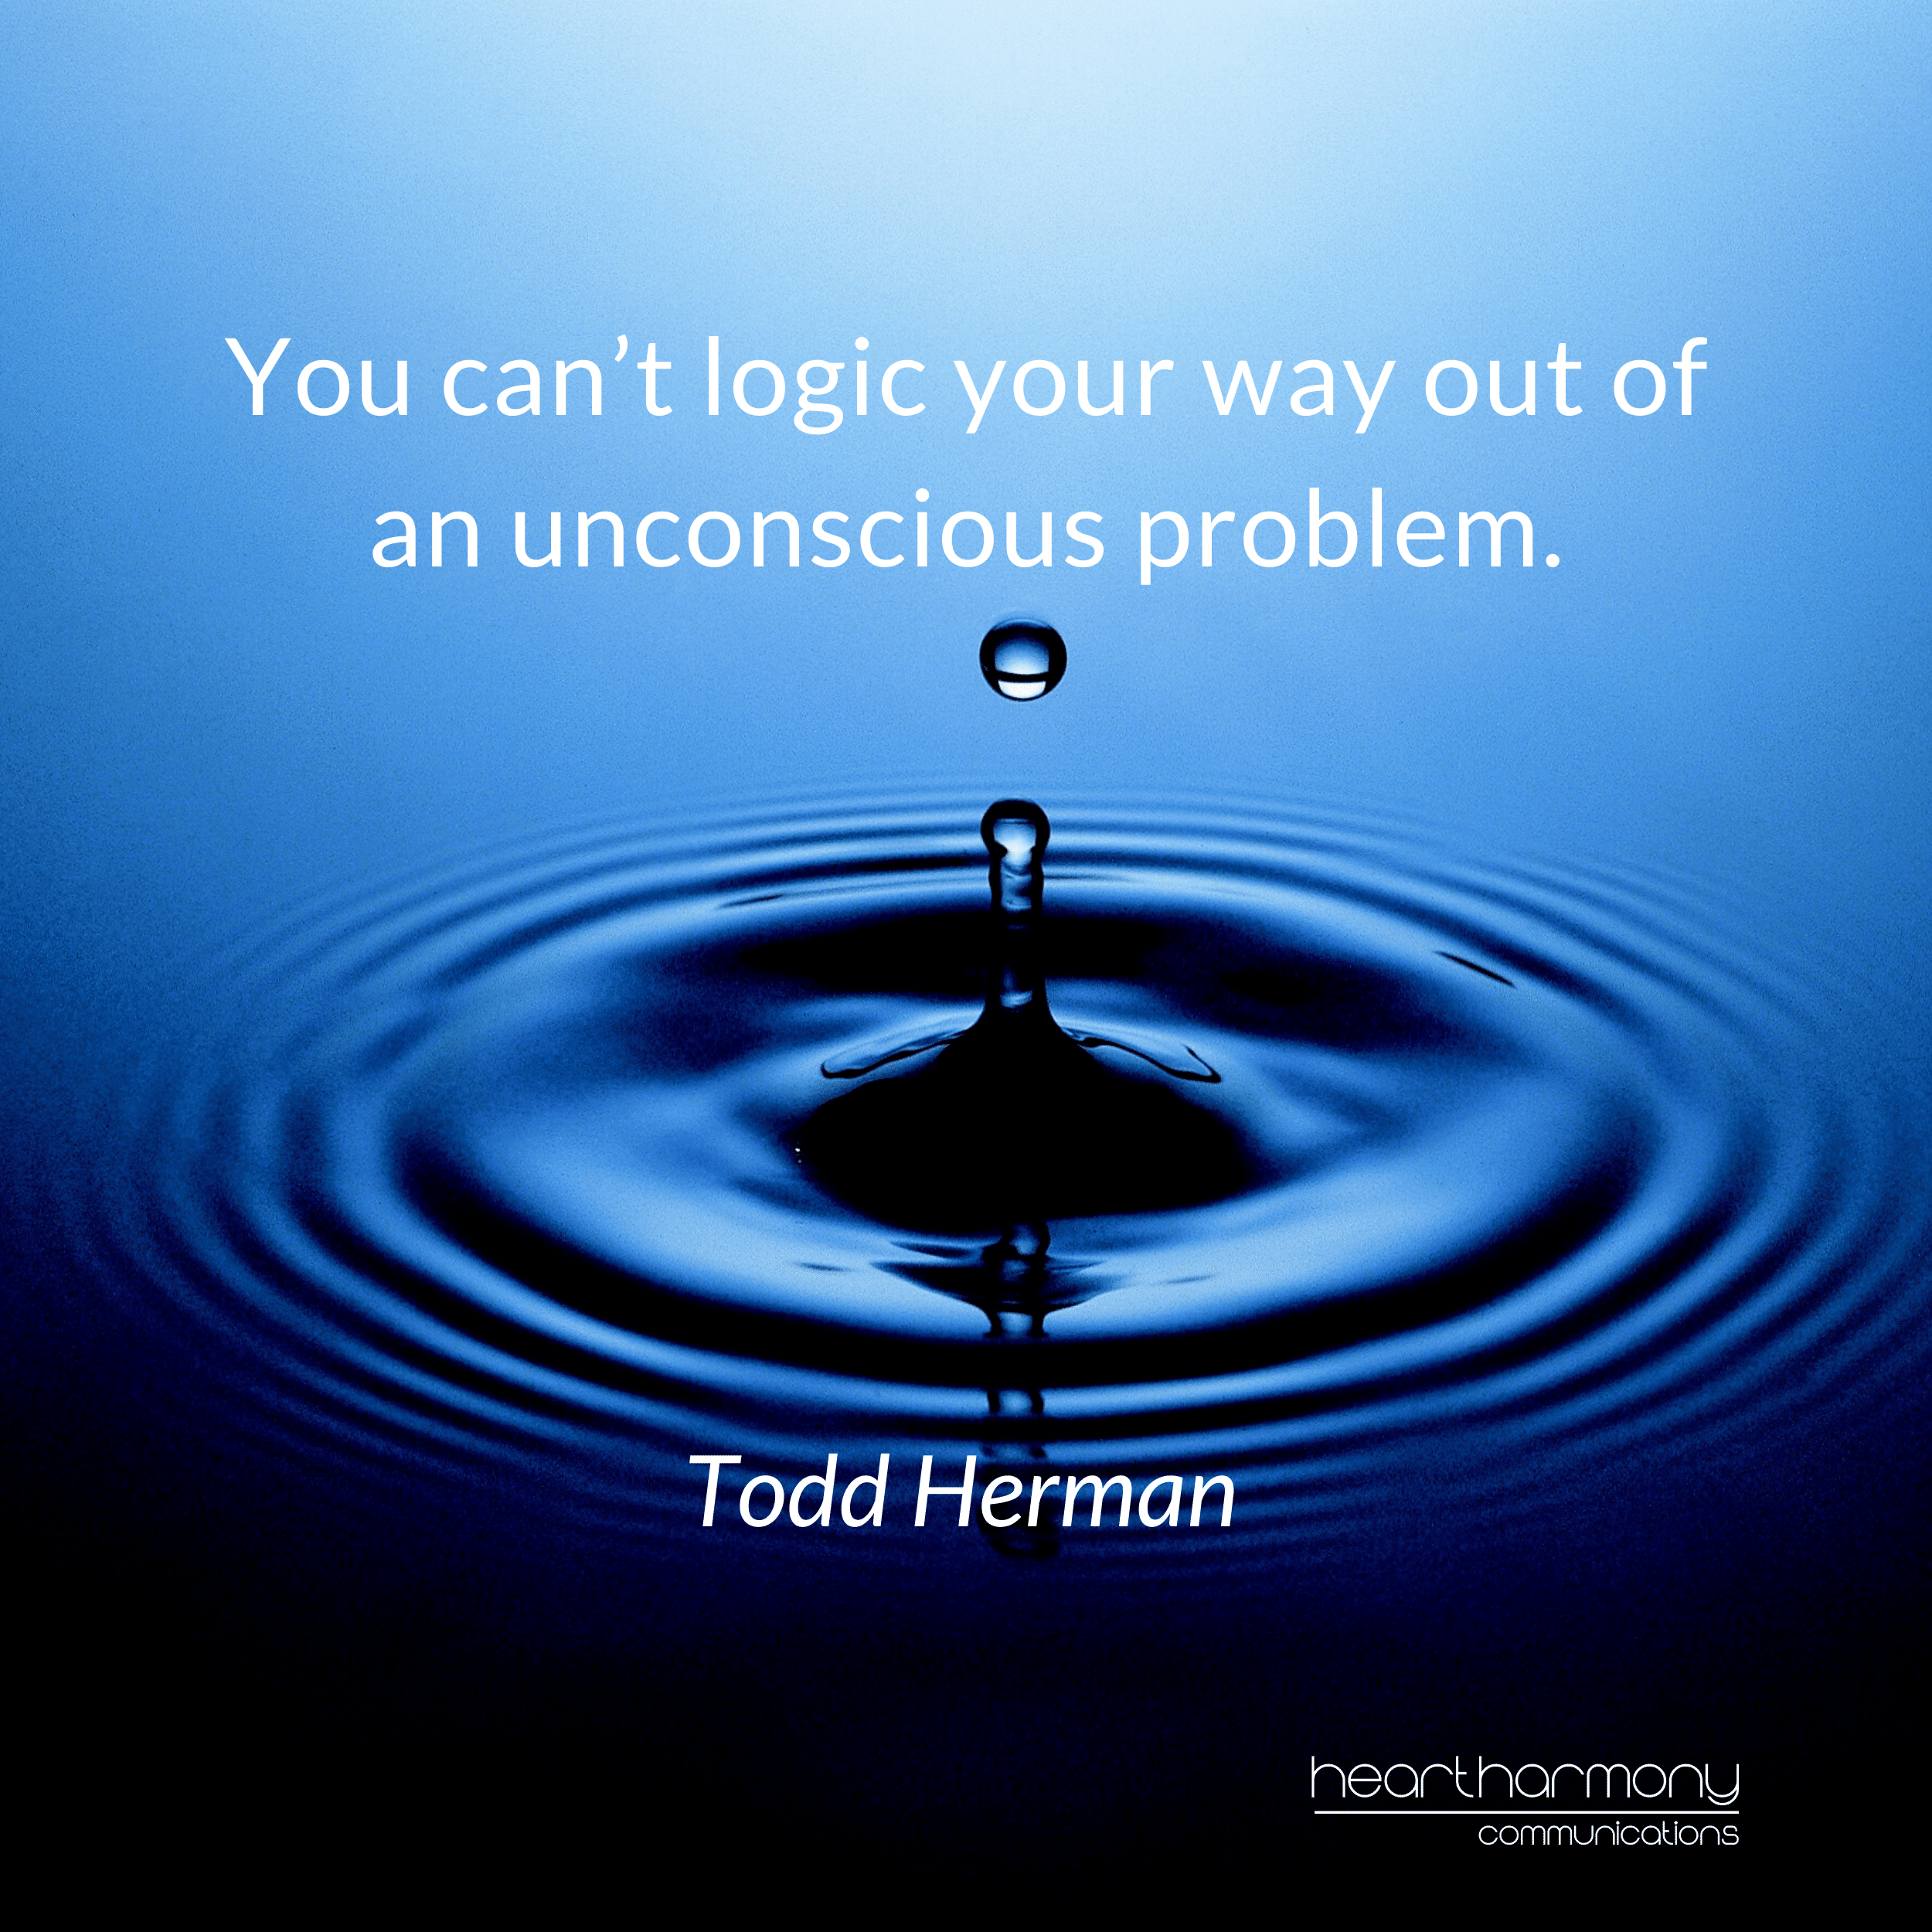 Todd Herman quote.